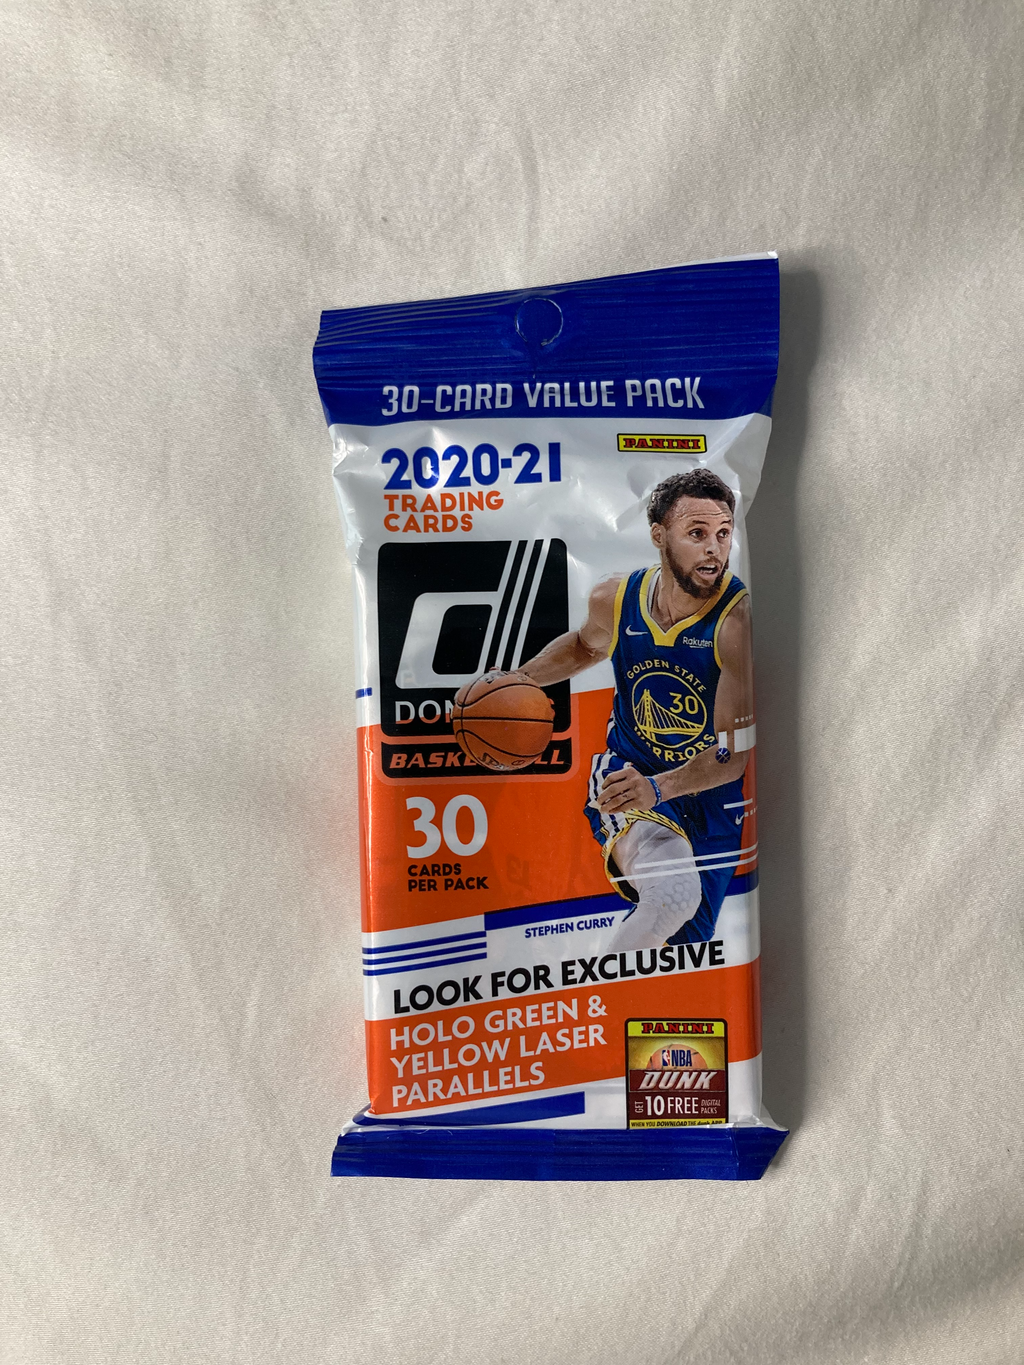 2020-21 Donruss Basketball 30 Card Fat Pack Collectible Cards